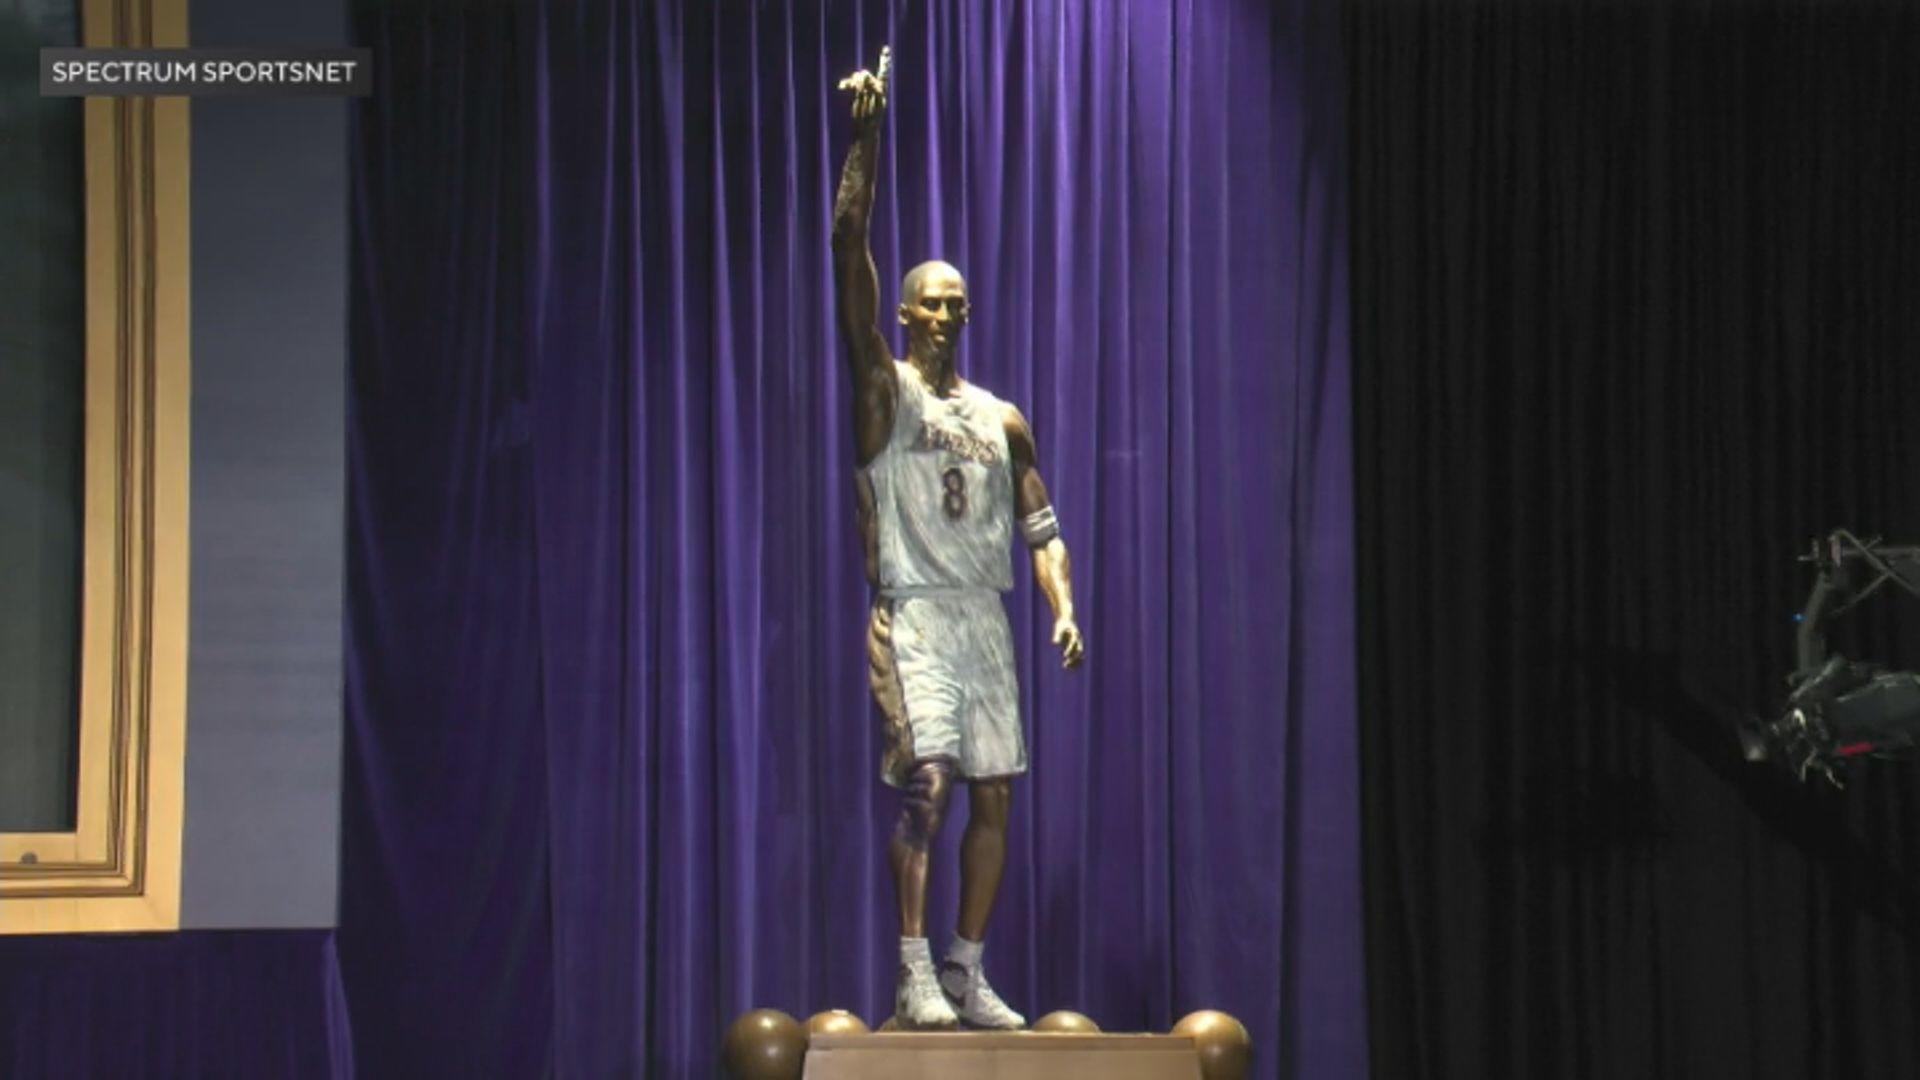 kobe bryant statue unveiled outside crypto.com arena in downtown los angeles